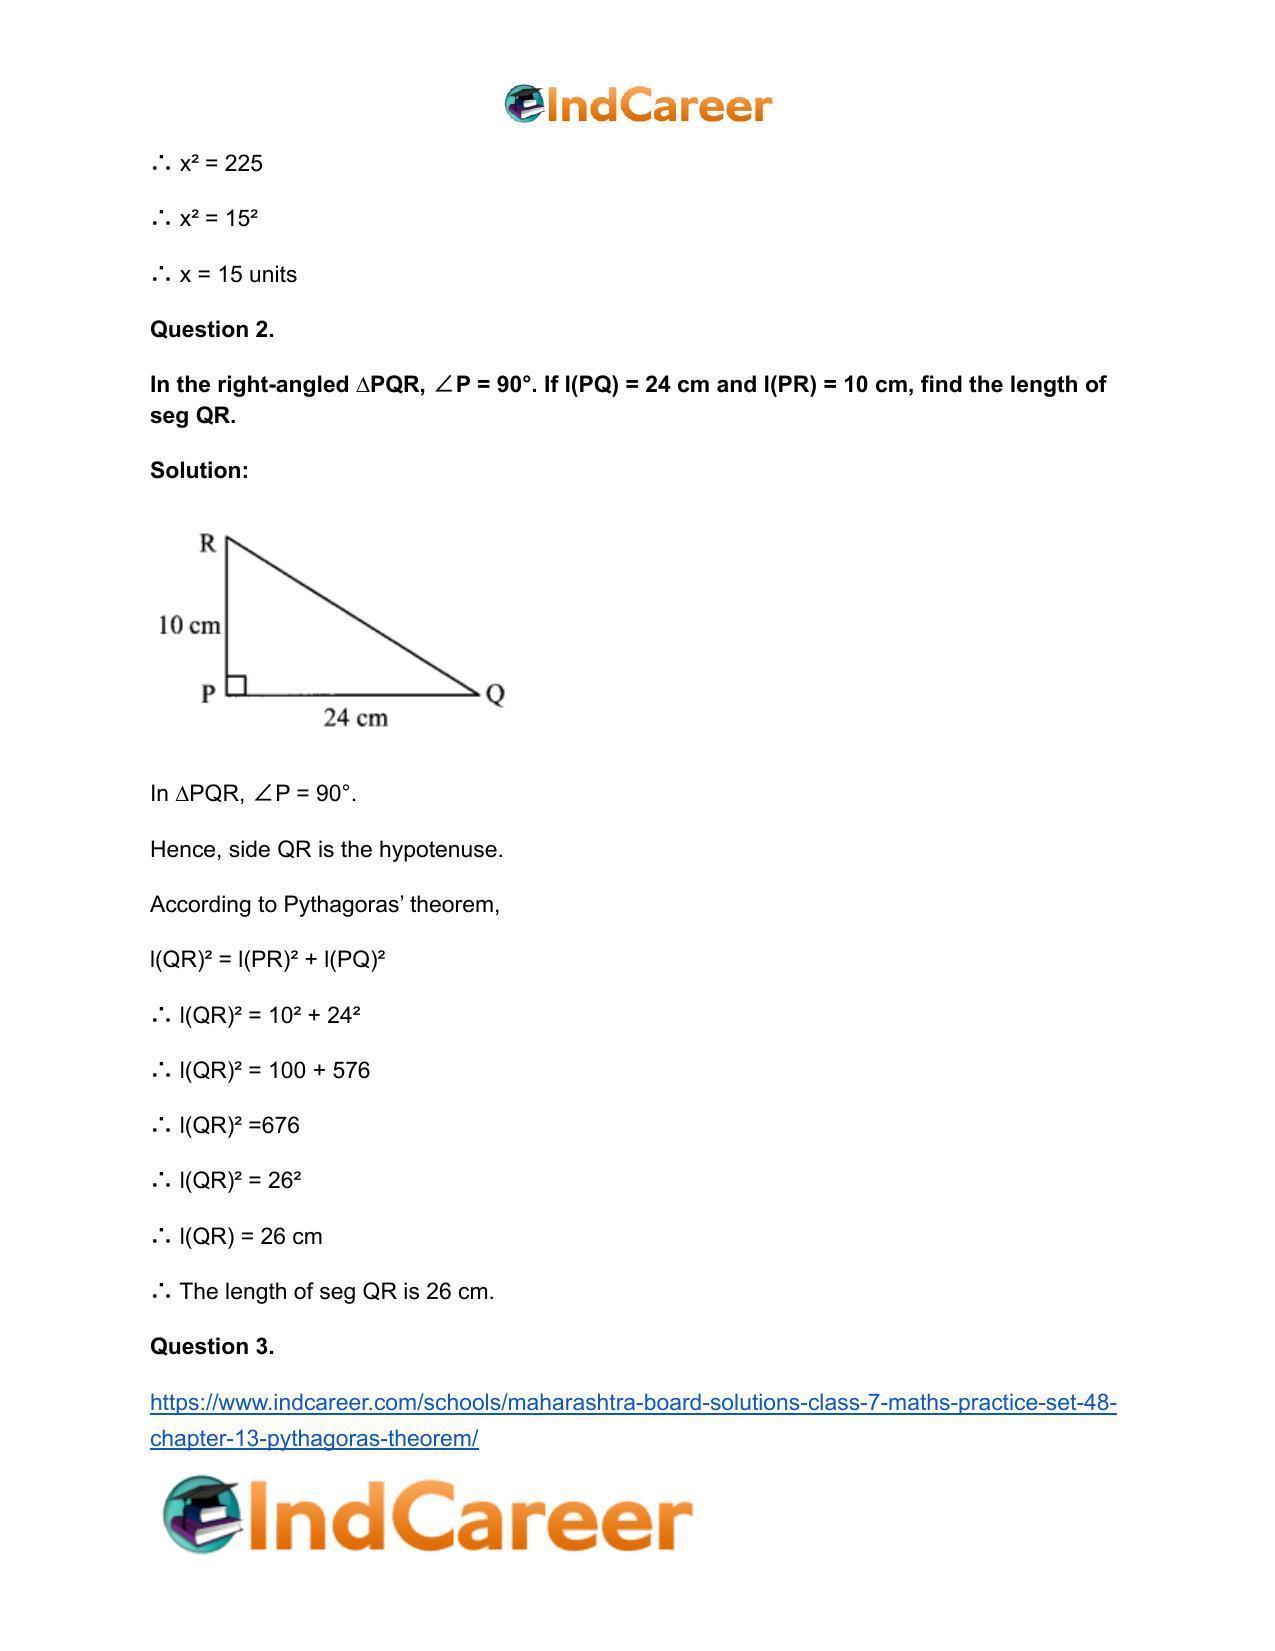 Maharashtra Board Solutions Class 7-Maths (Practice Set 48): Chapter 13- Pythagoras Theorem - Page 4